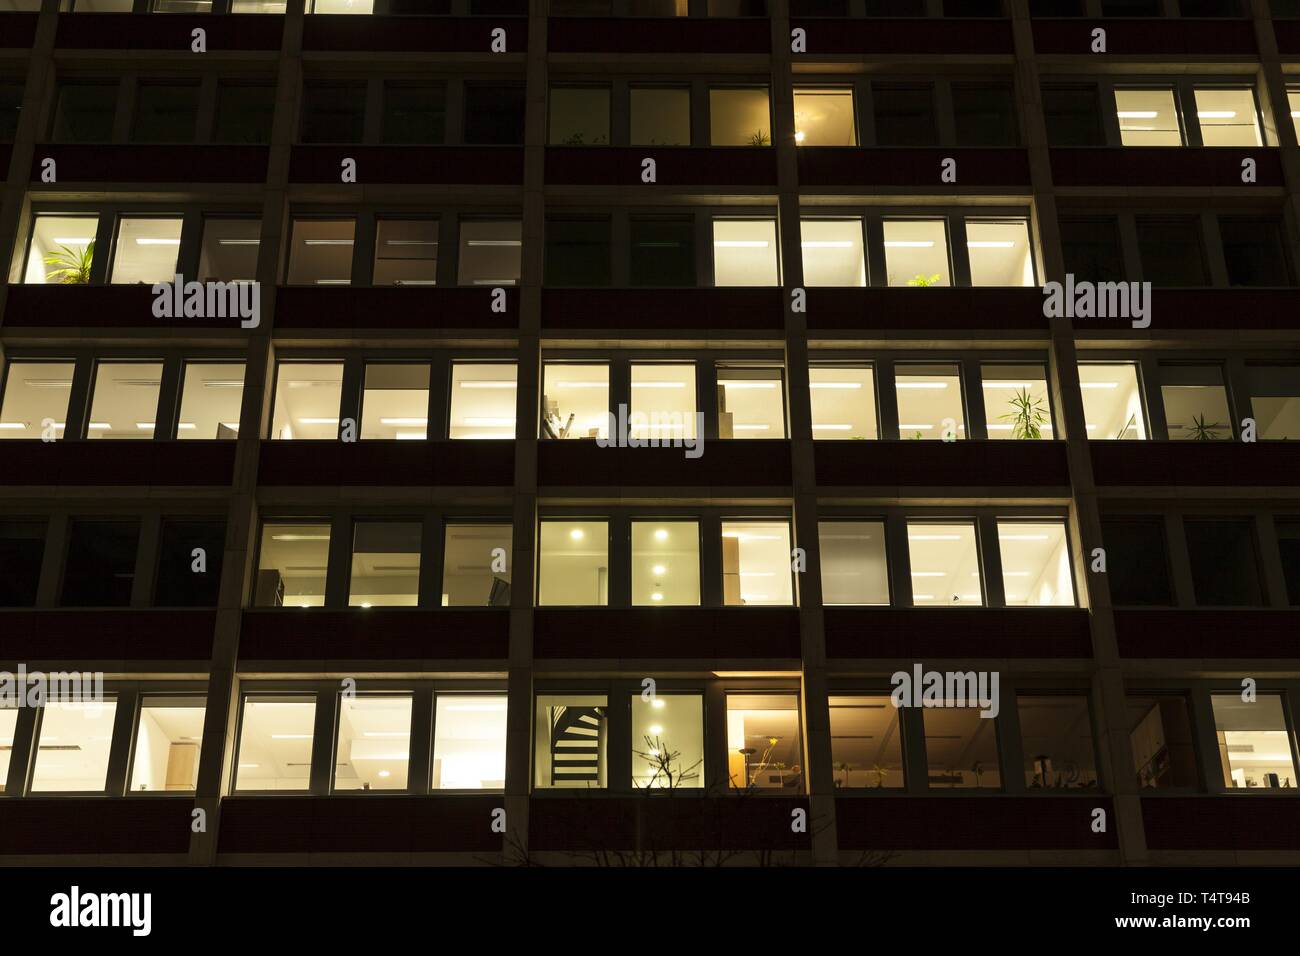 Lighted windows, office building Stock Photo